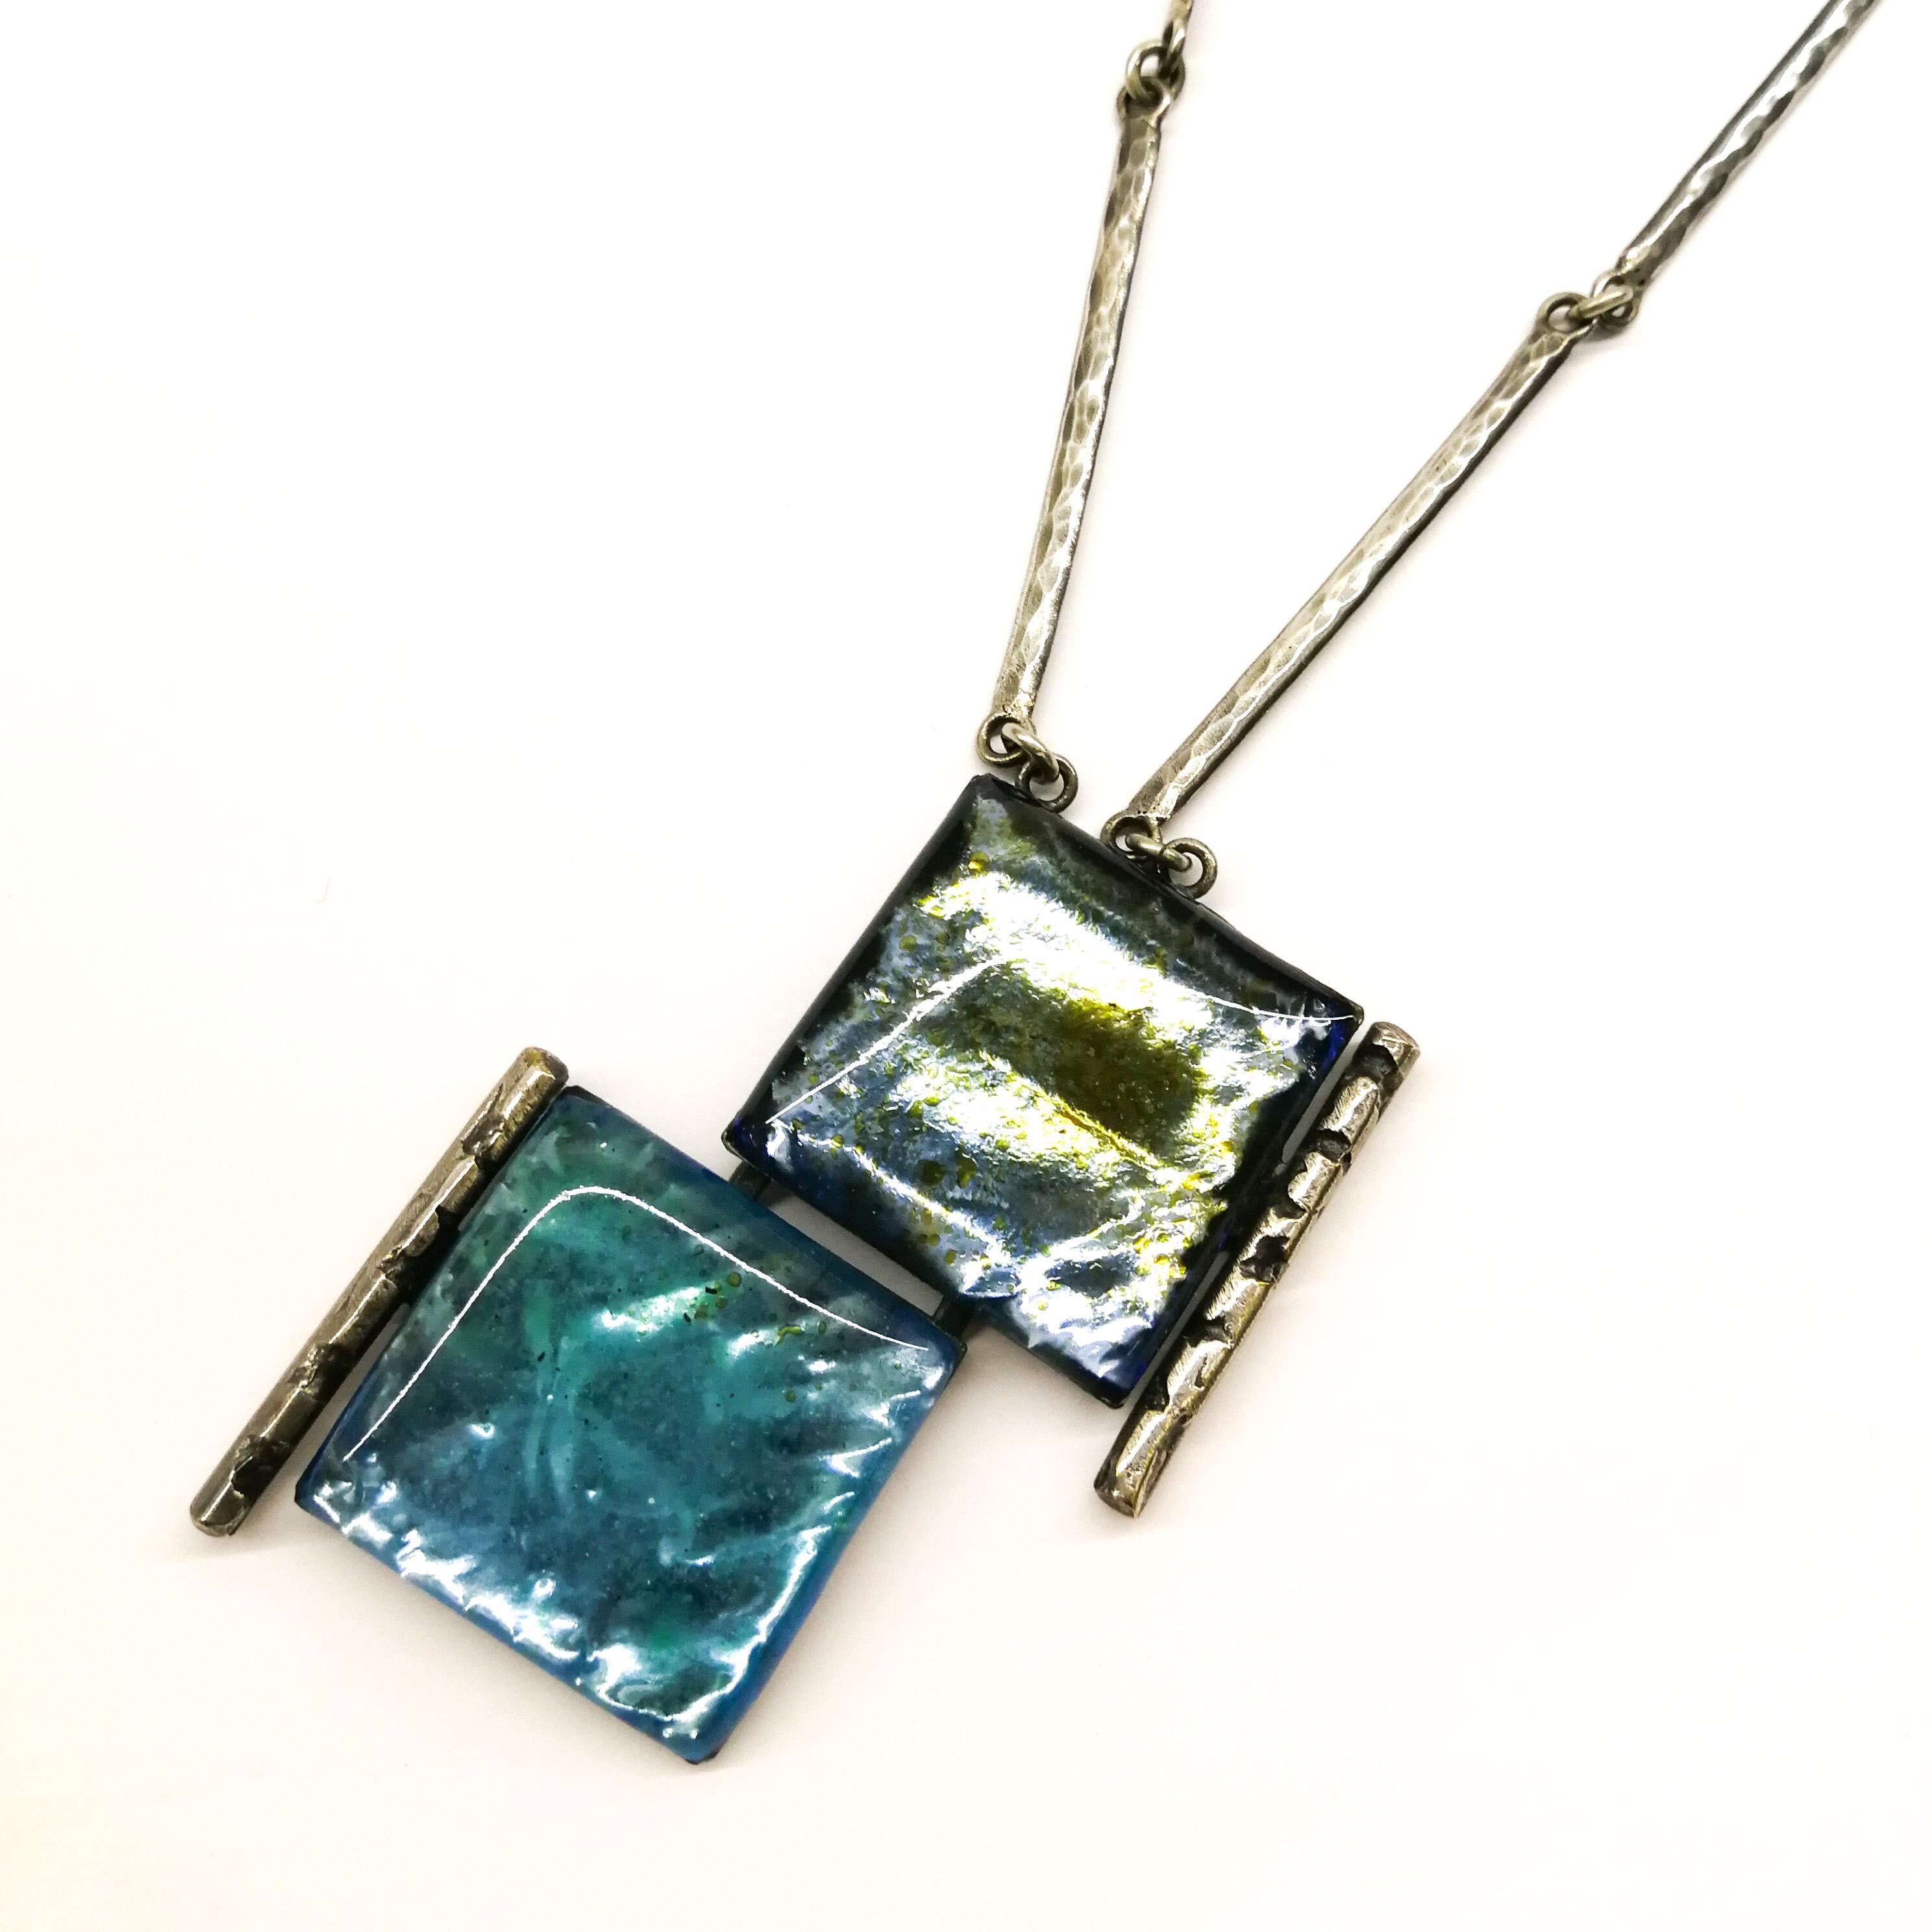 Two subtle, contrasting shades of blue enamel make this pendant hand crafted by Jacques Gautier eye-catching and  appealing, a watery aquamarine blue next to a grey darker blue. Highly typical of the exquisite work of Jacques Gautier, the metal work